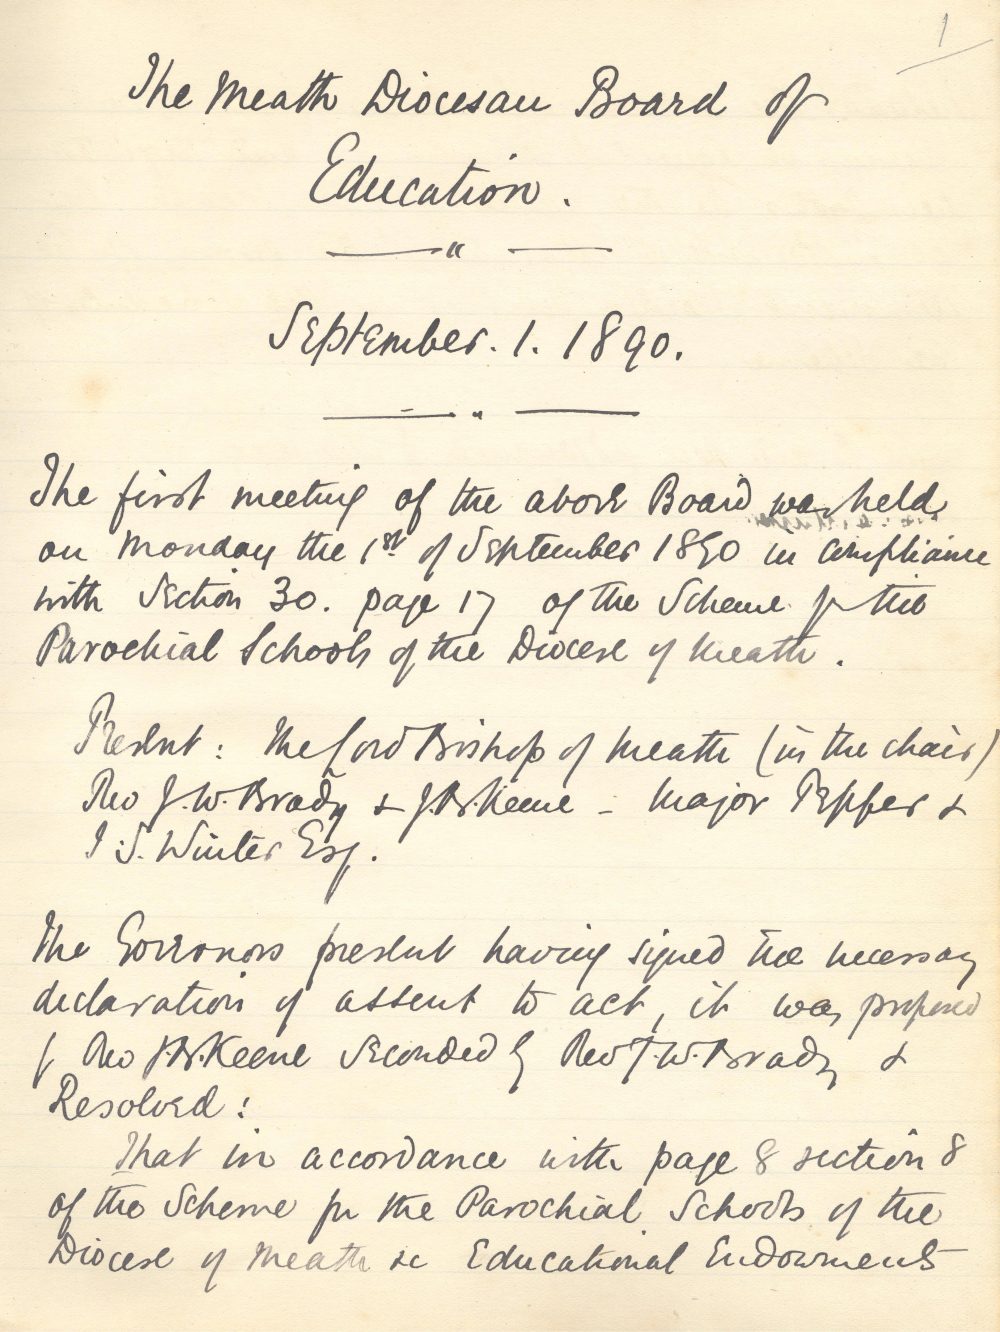 Minute book of the Meath Diocesan Board of Education, commencing in 1890, RCB Library D7/13/1/1